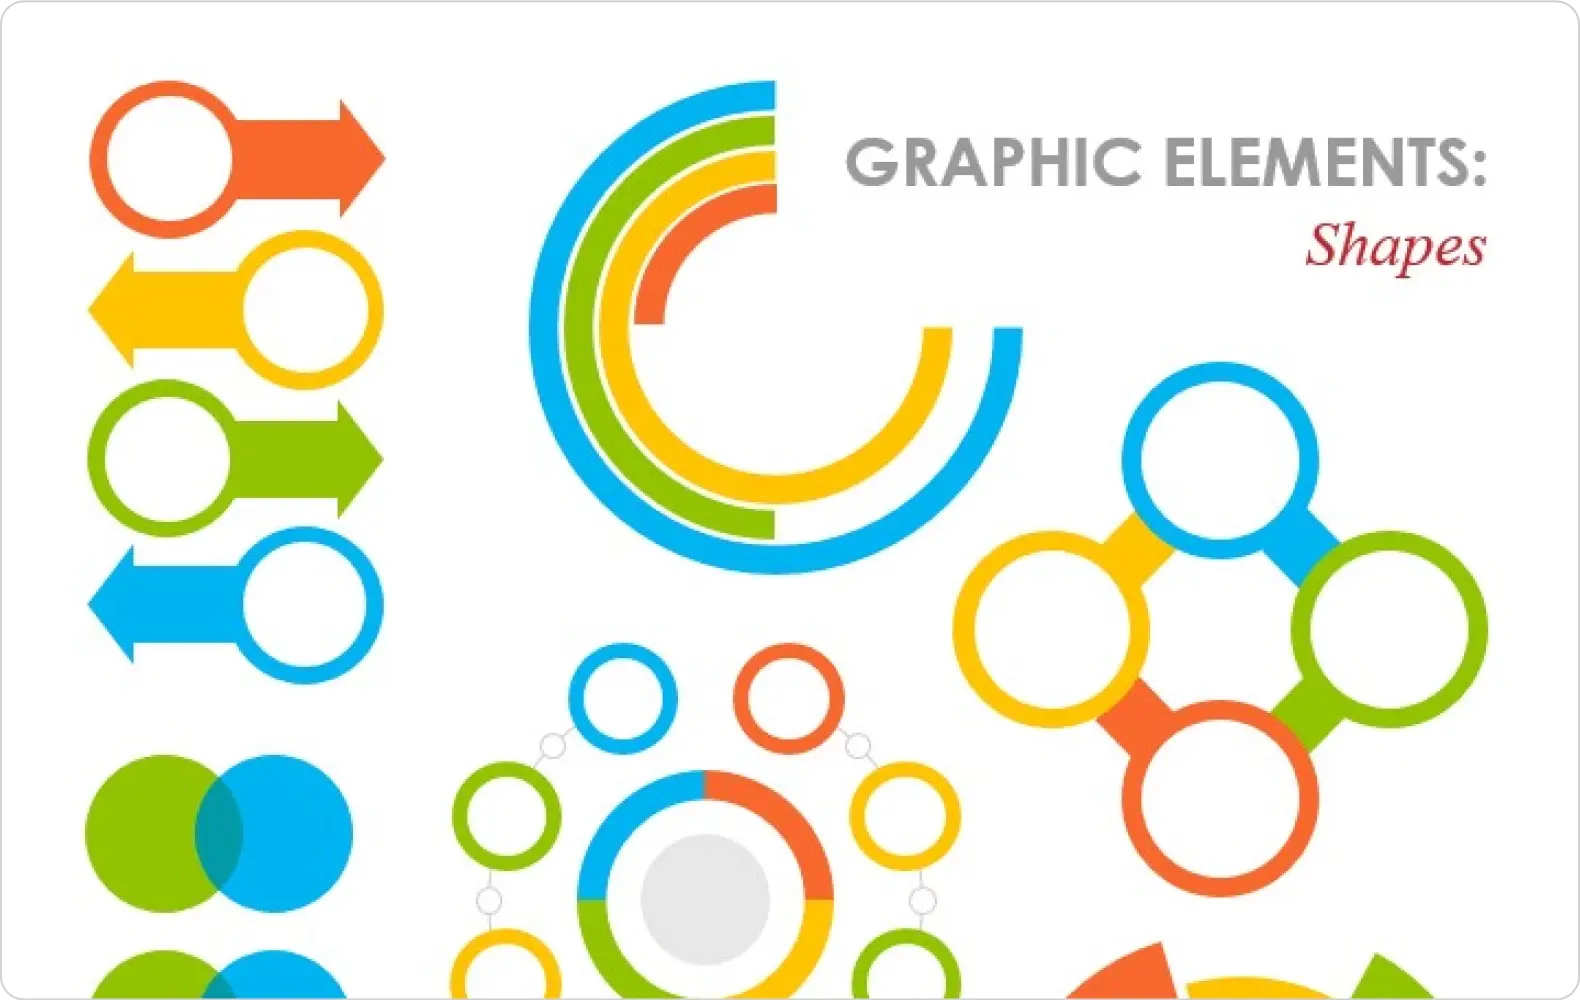 Shapes used to create different graphic elements.